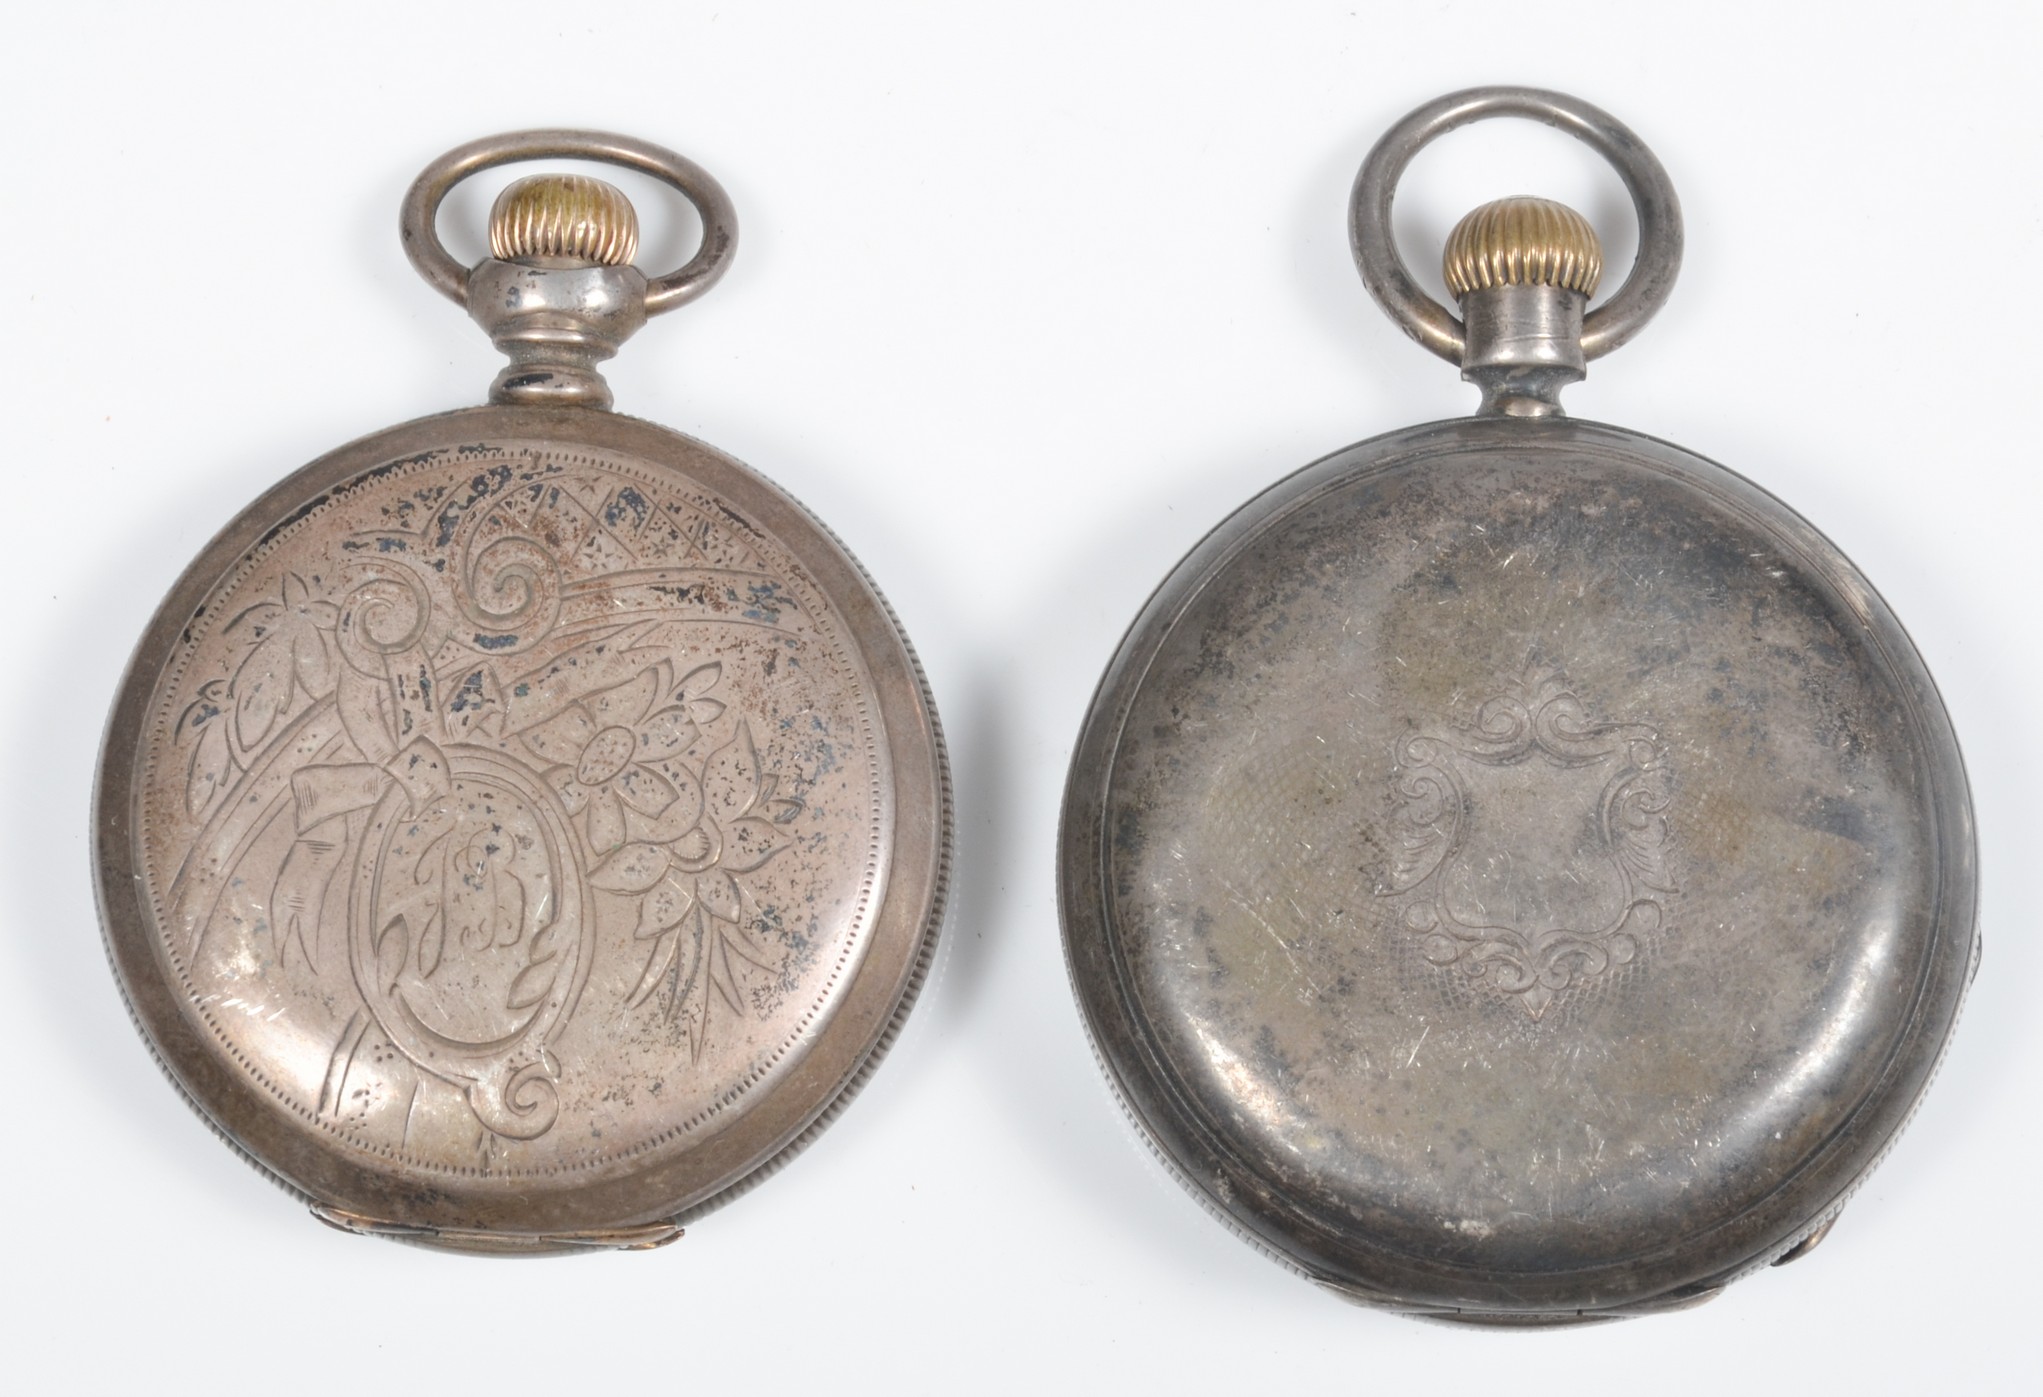  2 19th C silver pocket watches 3b694a